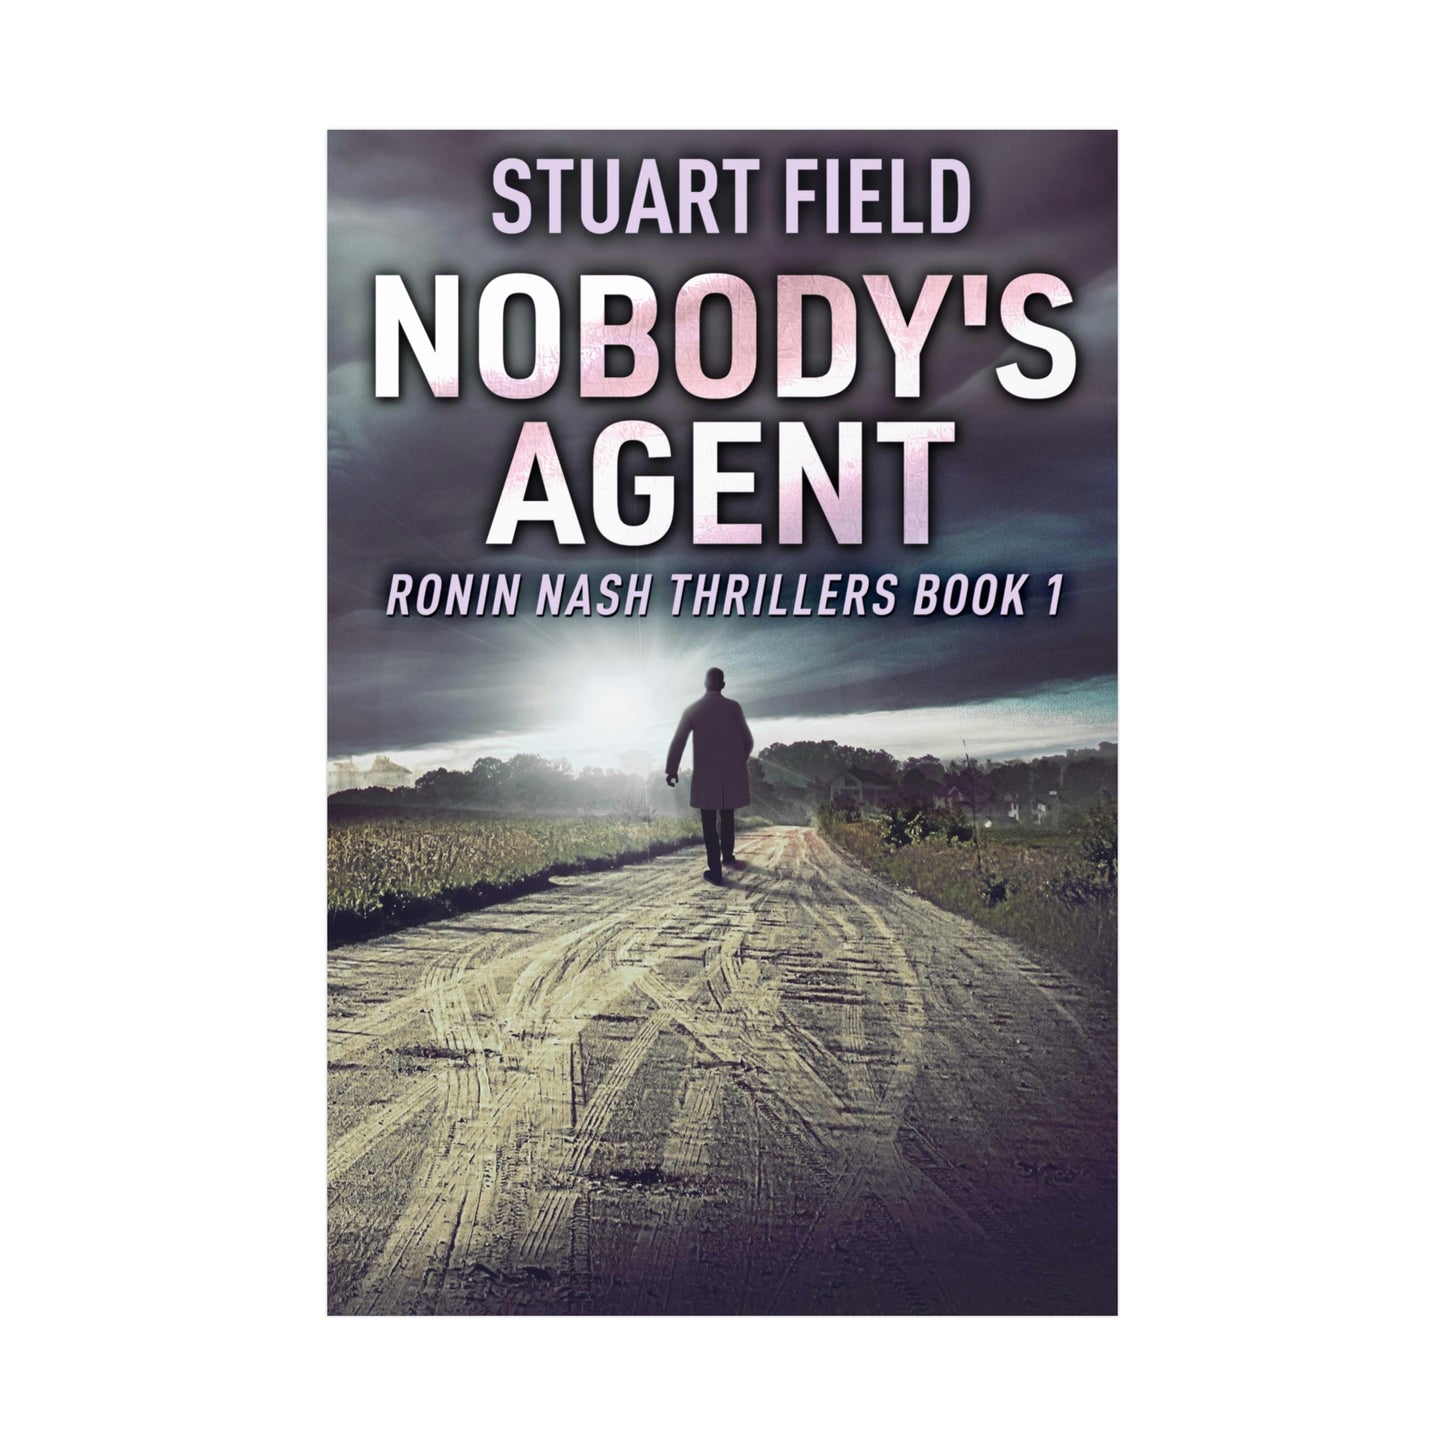 Nobody's Agent - Rolled Poster